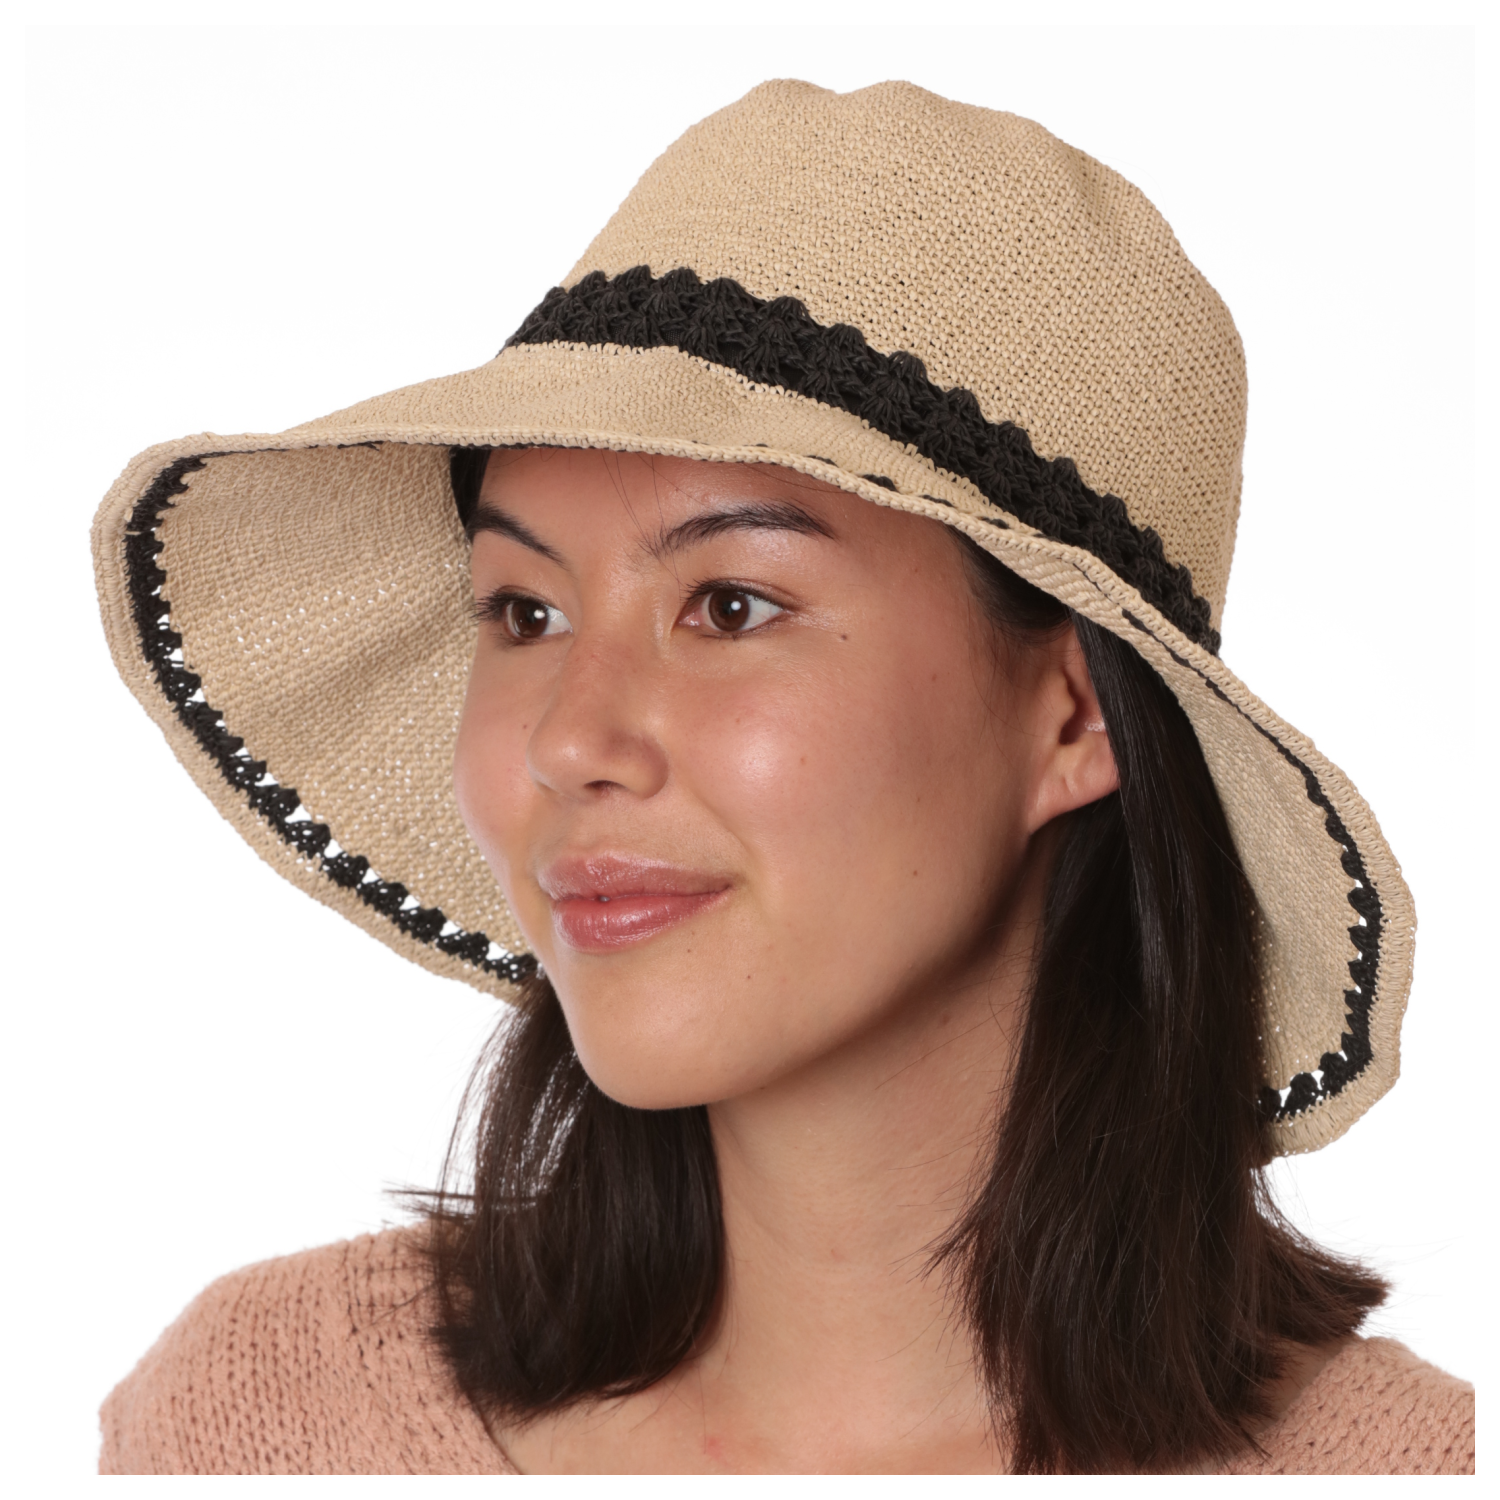 Koekohe Embroidered Straw Sun Hat for Women